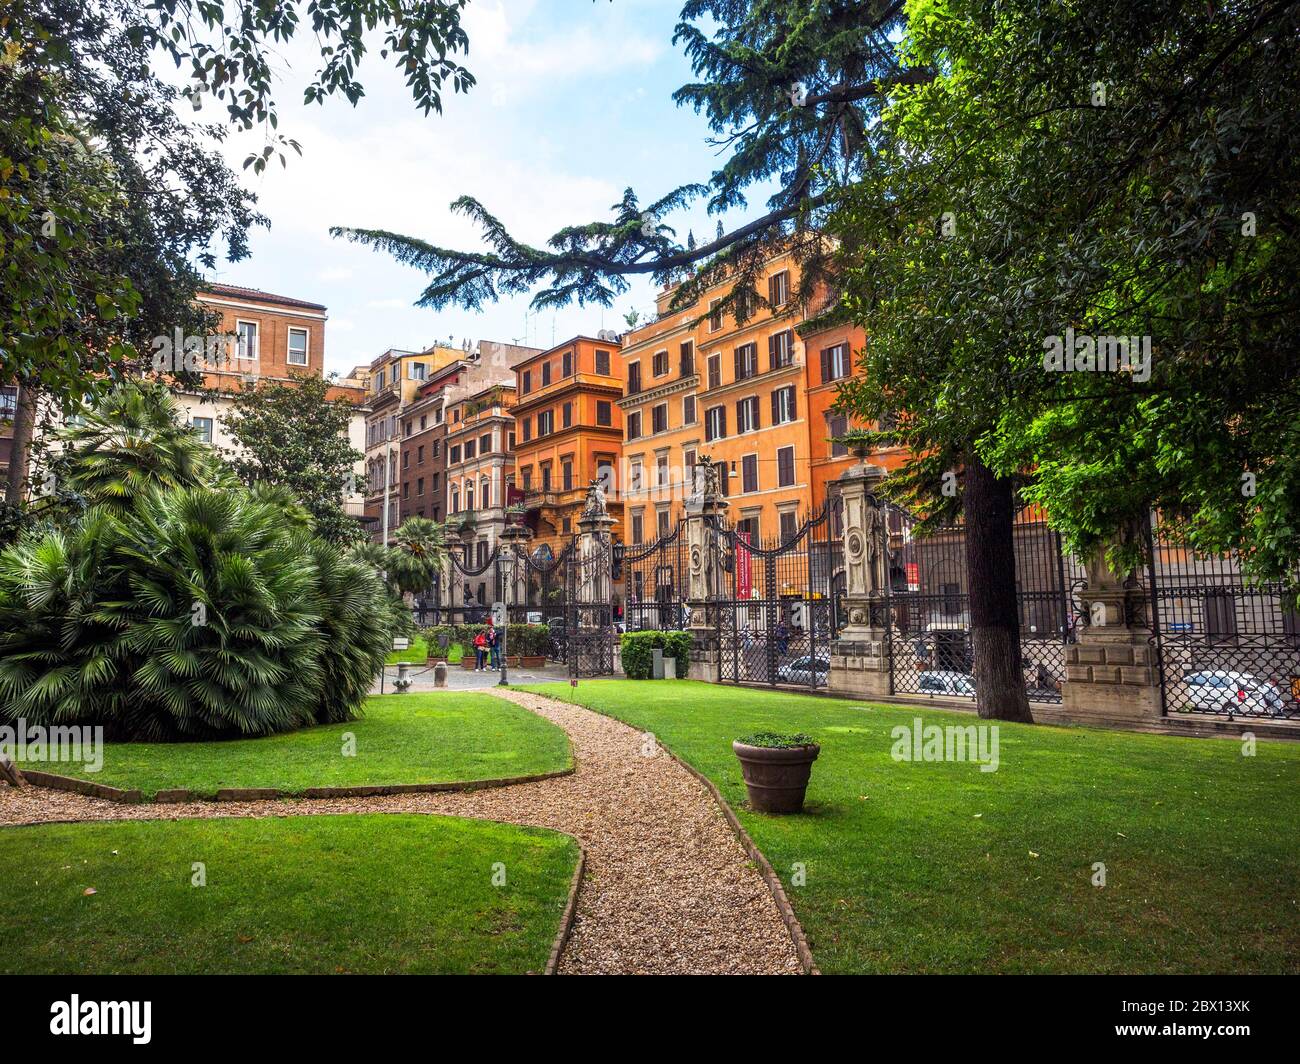 Front gardens of Palazzo Barberini that houses the Galleria Nazionale d'Arte Antica - Rome, Italy Stock Photo